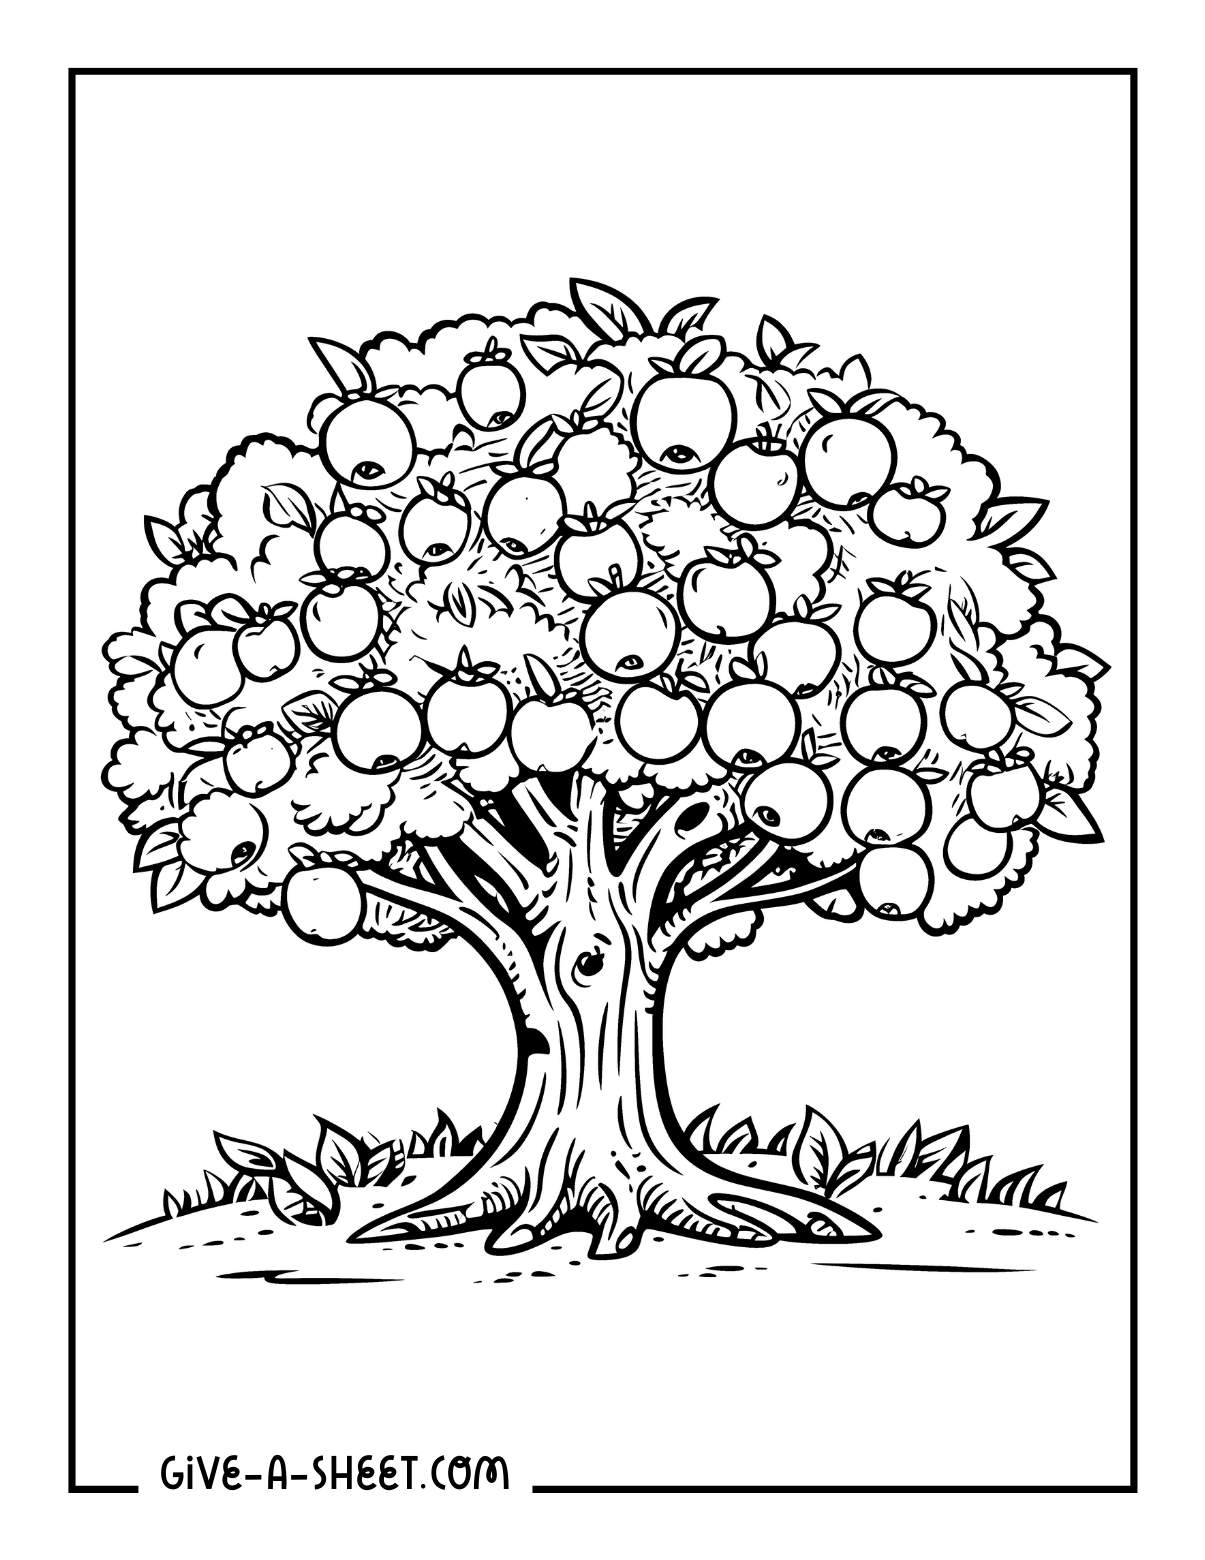 Delicious apples on tree coloring page.